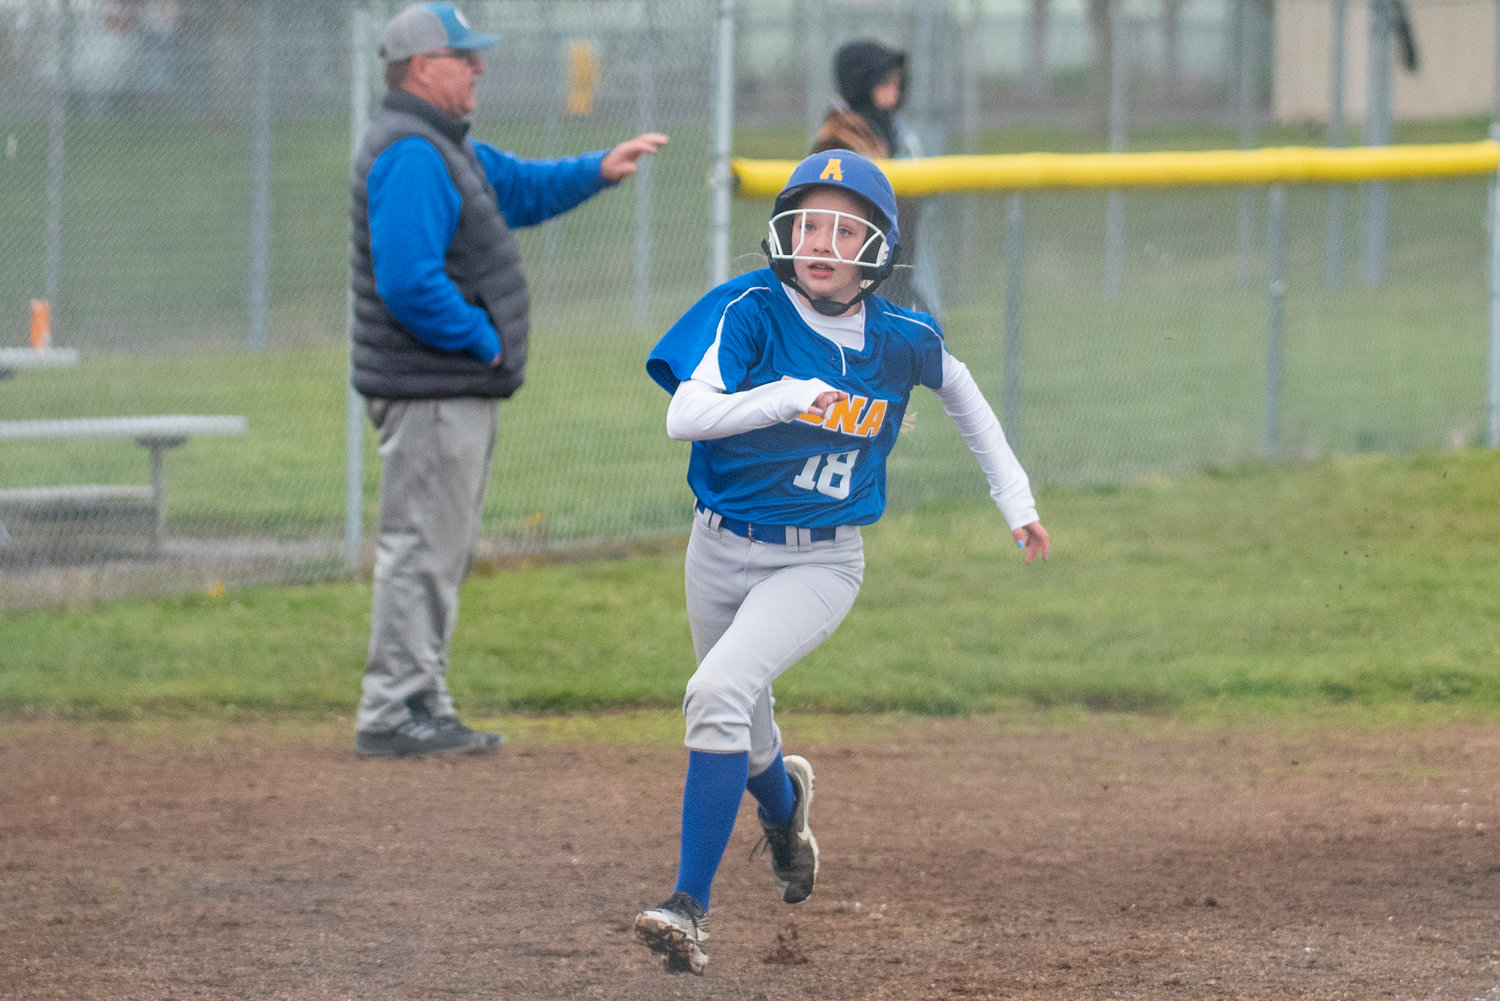 Adna's Lena McCloskey rounds third and races home to score against Winlock during a road game on April 20.